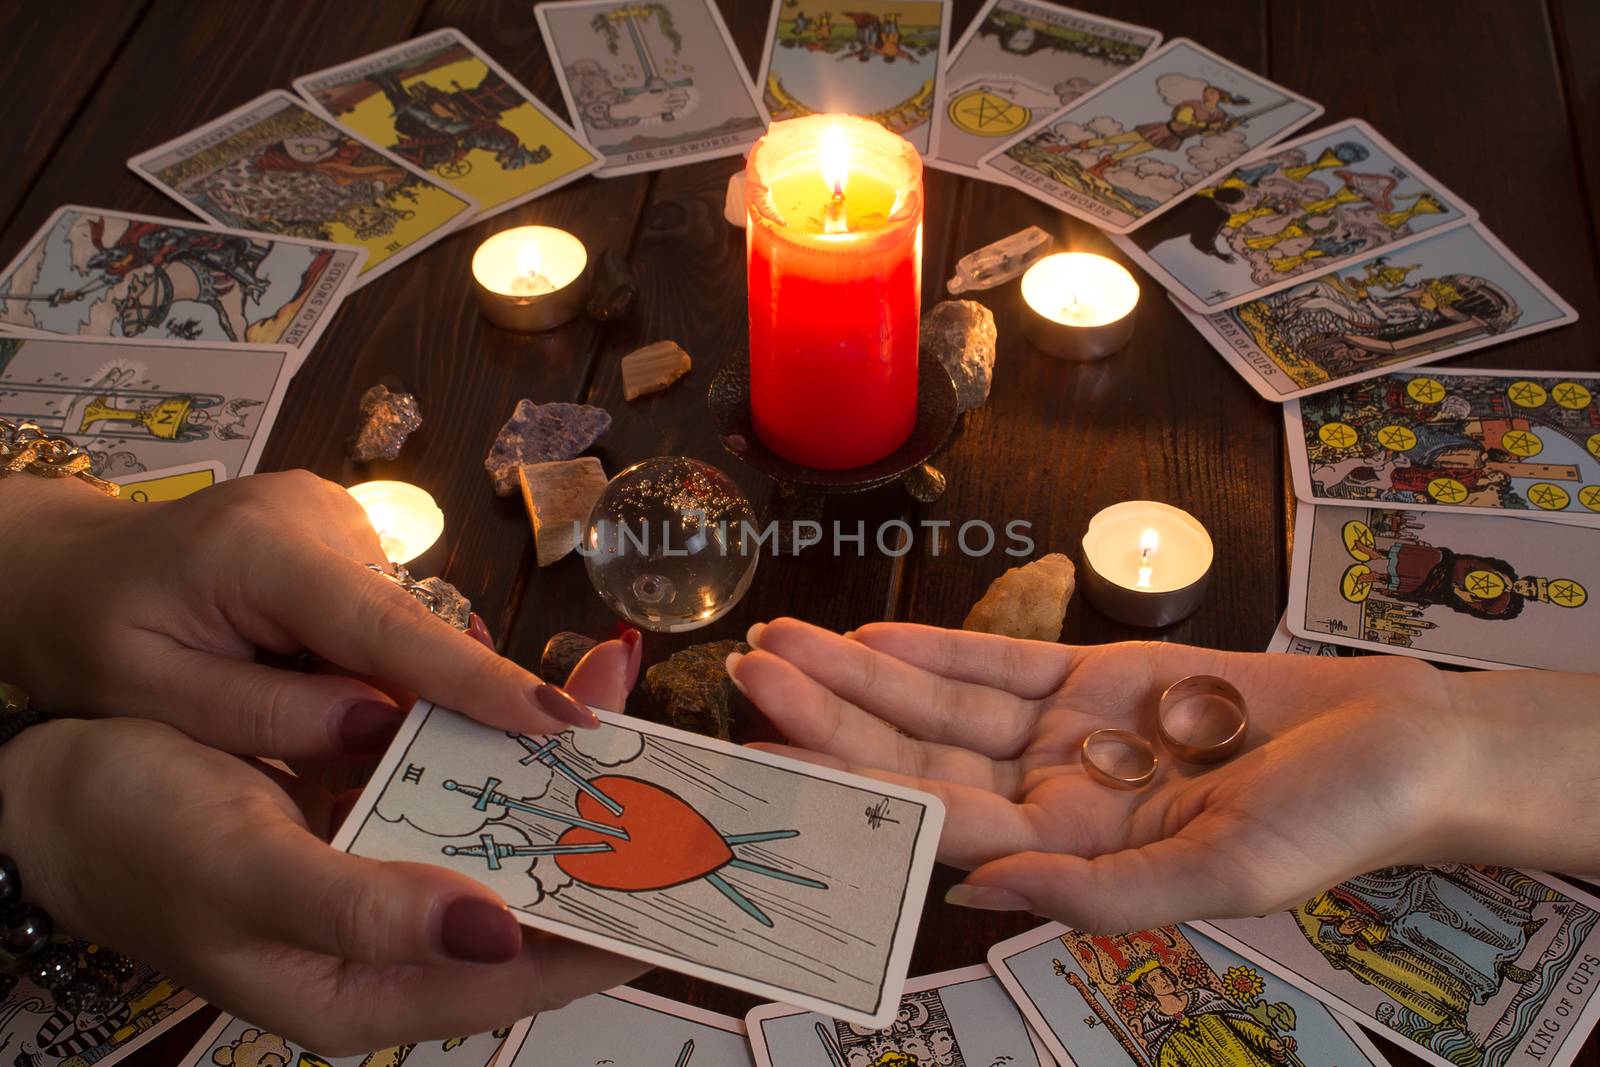 Bangkok,Thailand,March.15.20.The girl holds wedding rings on her hand with Tarot cards,crystals,a magic ball and a lighted candle.Fortune telling for love, the rite of love spell